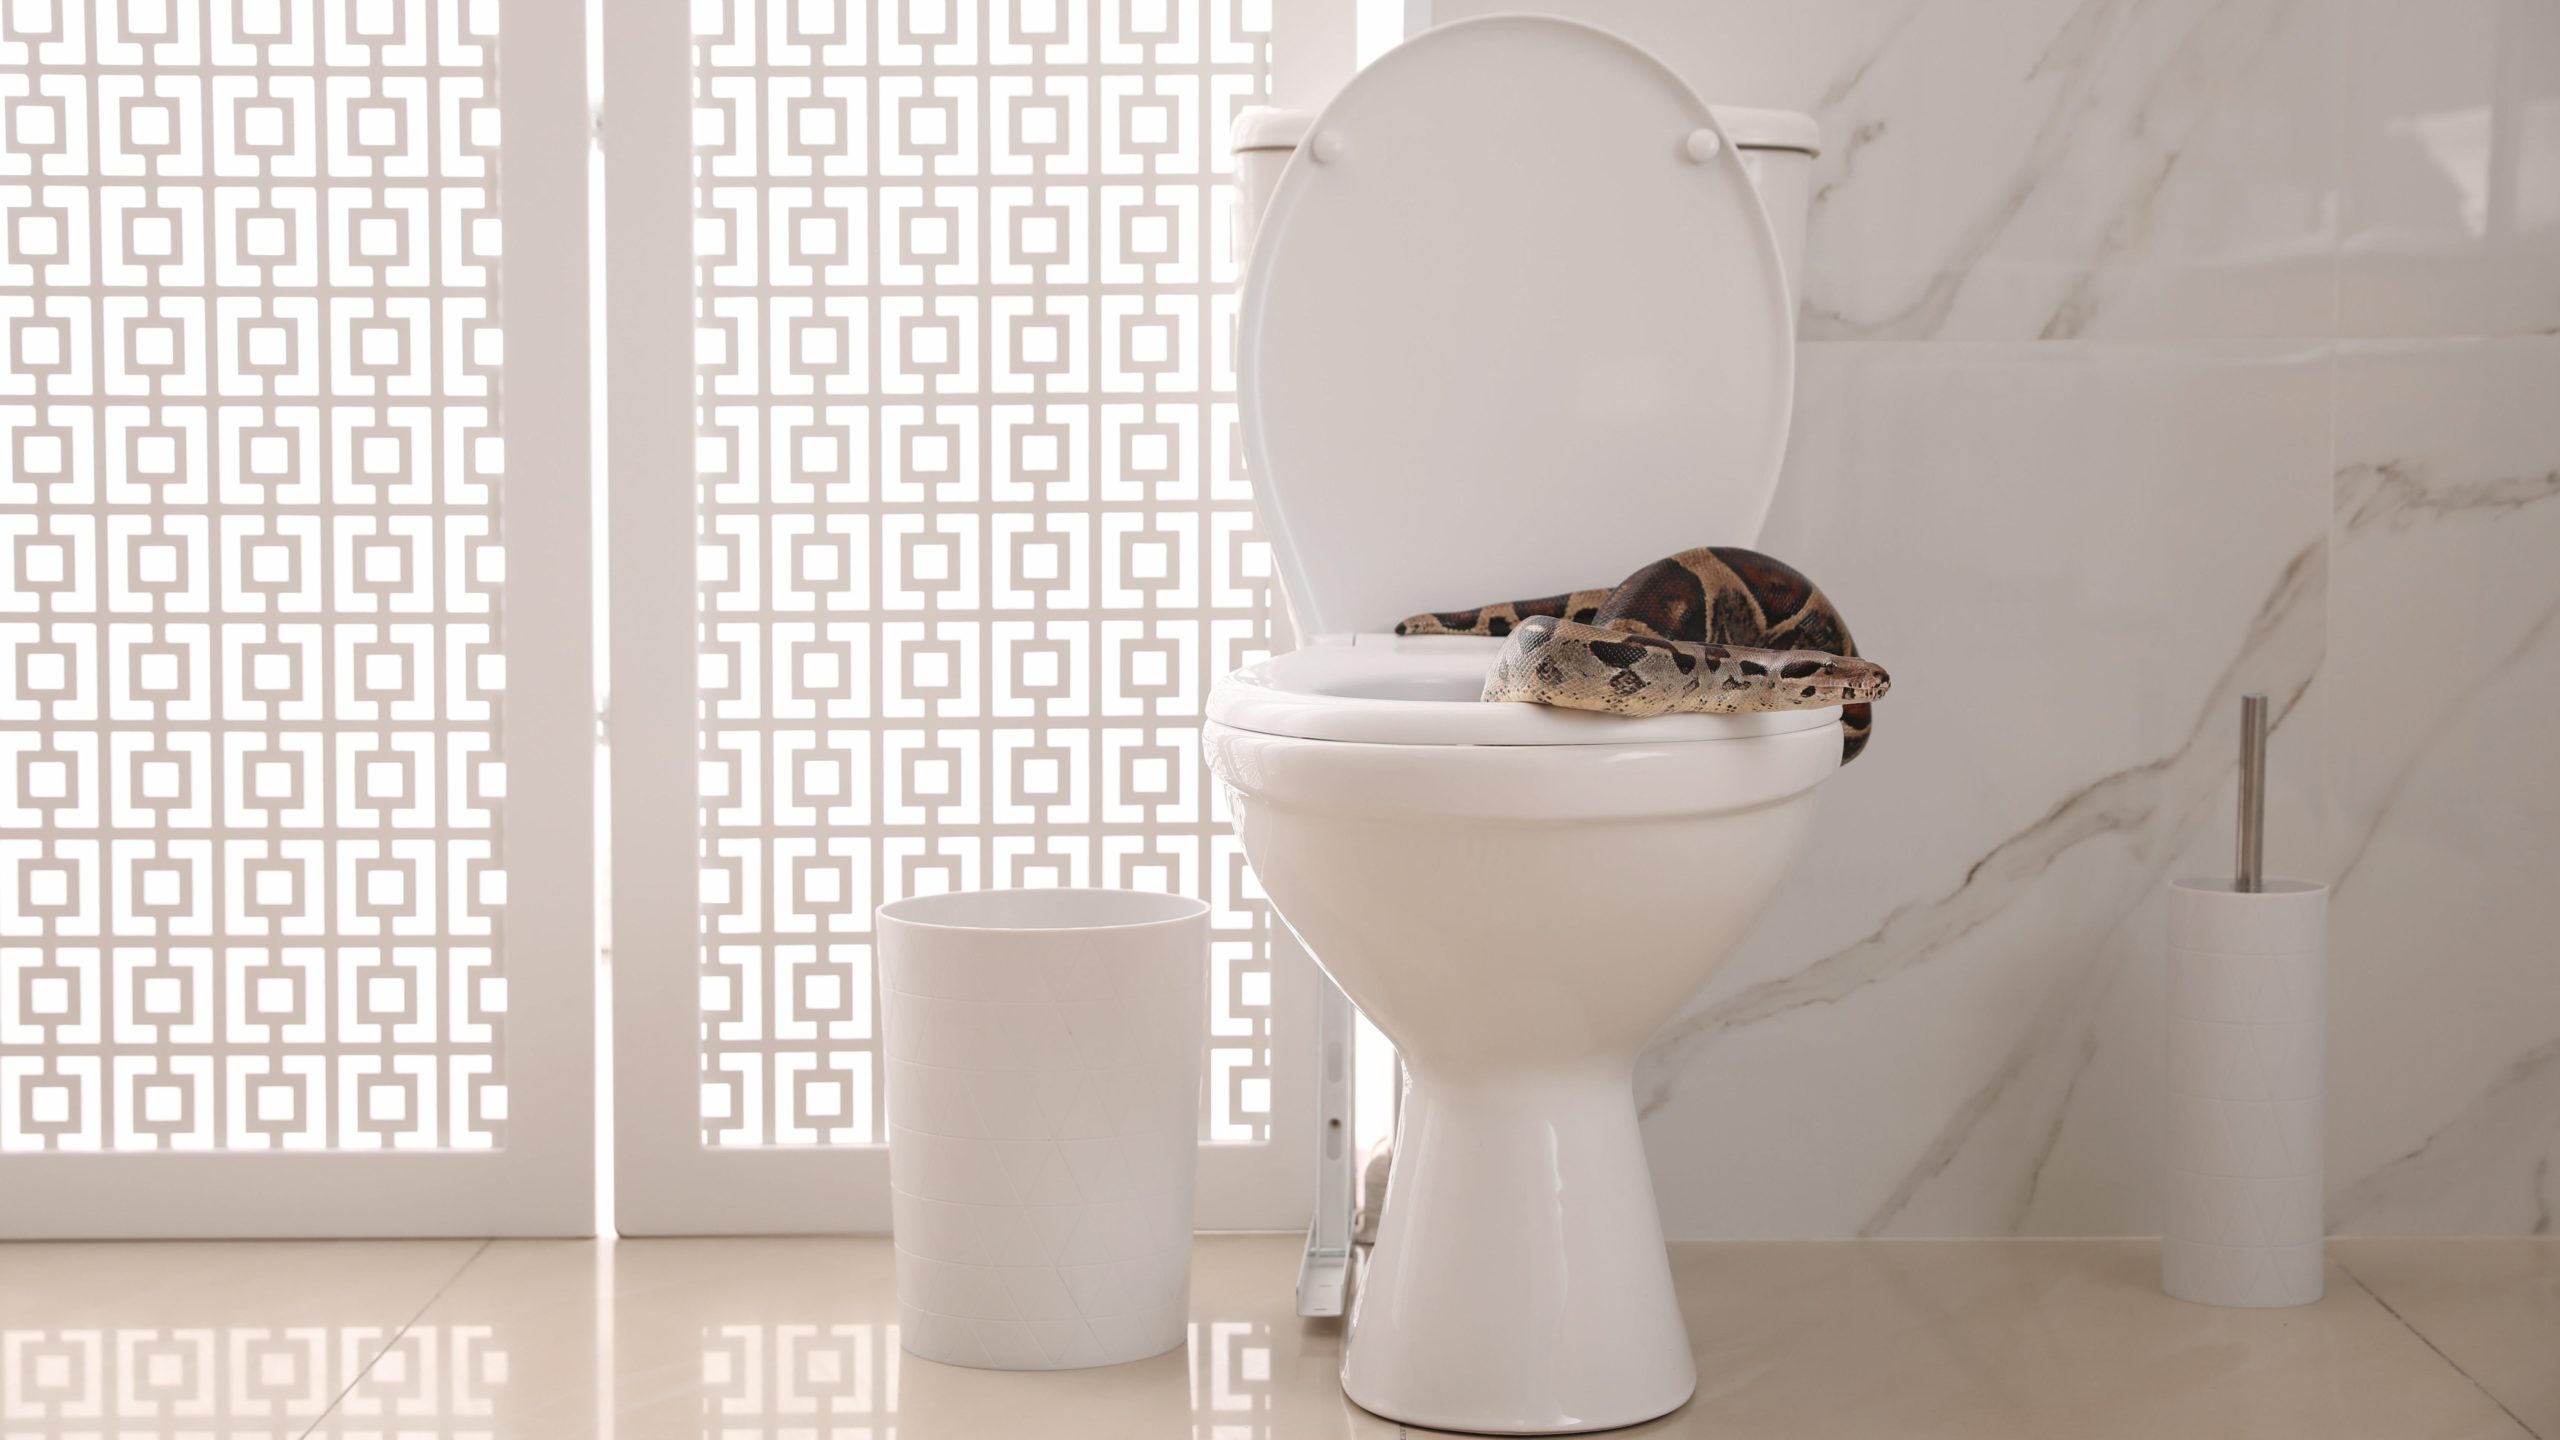 How Often Do Snakes, Rats, and Spiders Really Crawl Up Your Toilet Pipes? (And How to Stop Them)